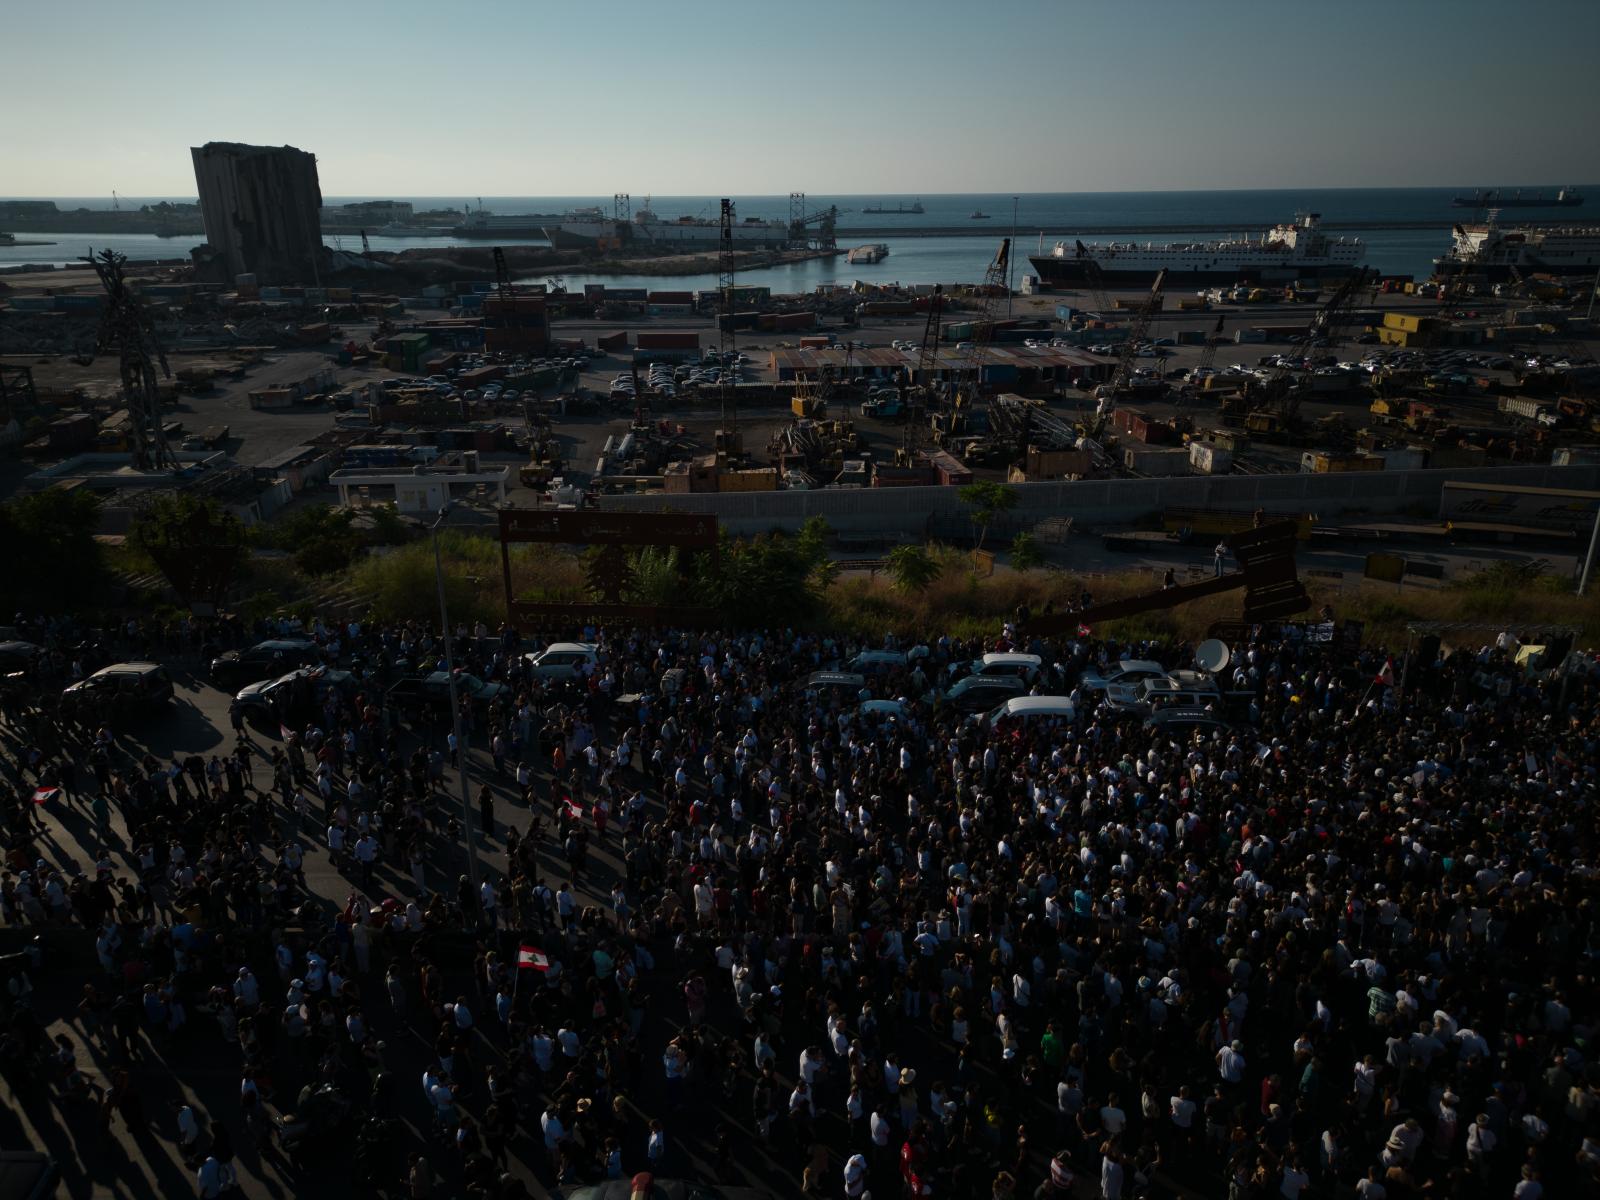 Beirut port explosion 3rd anniversary | Buy this image